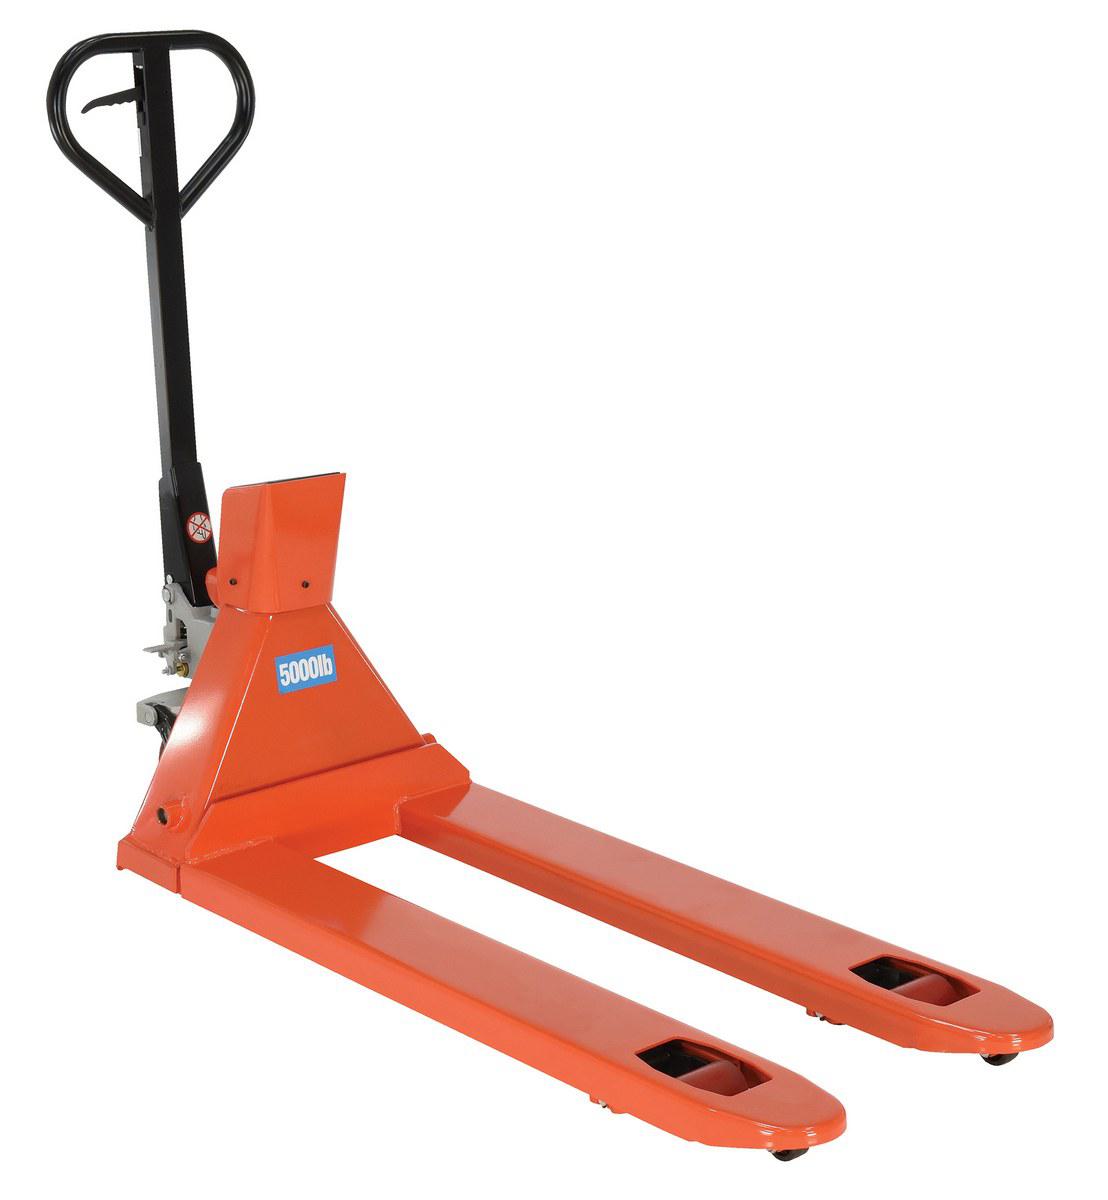 Scale Pallet Truck, Trade Legal, 21 x 46 Inch Size